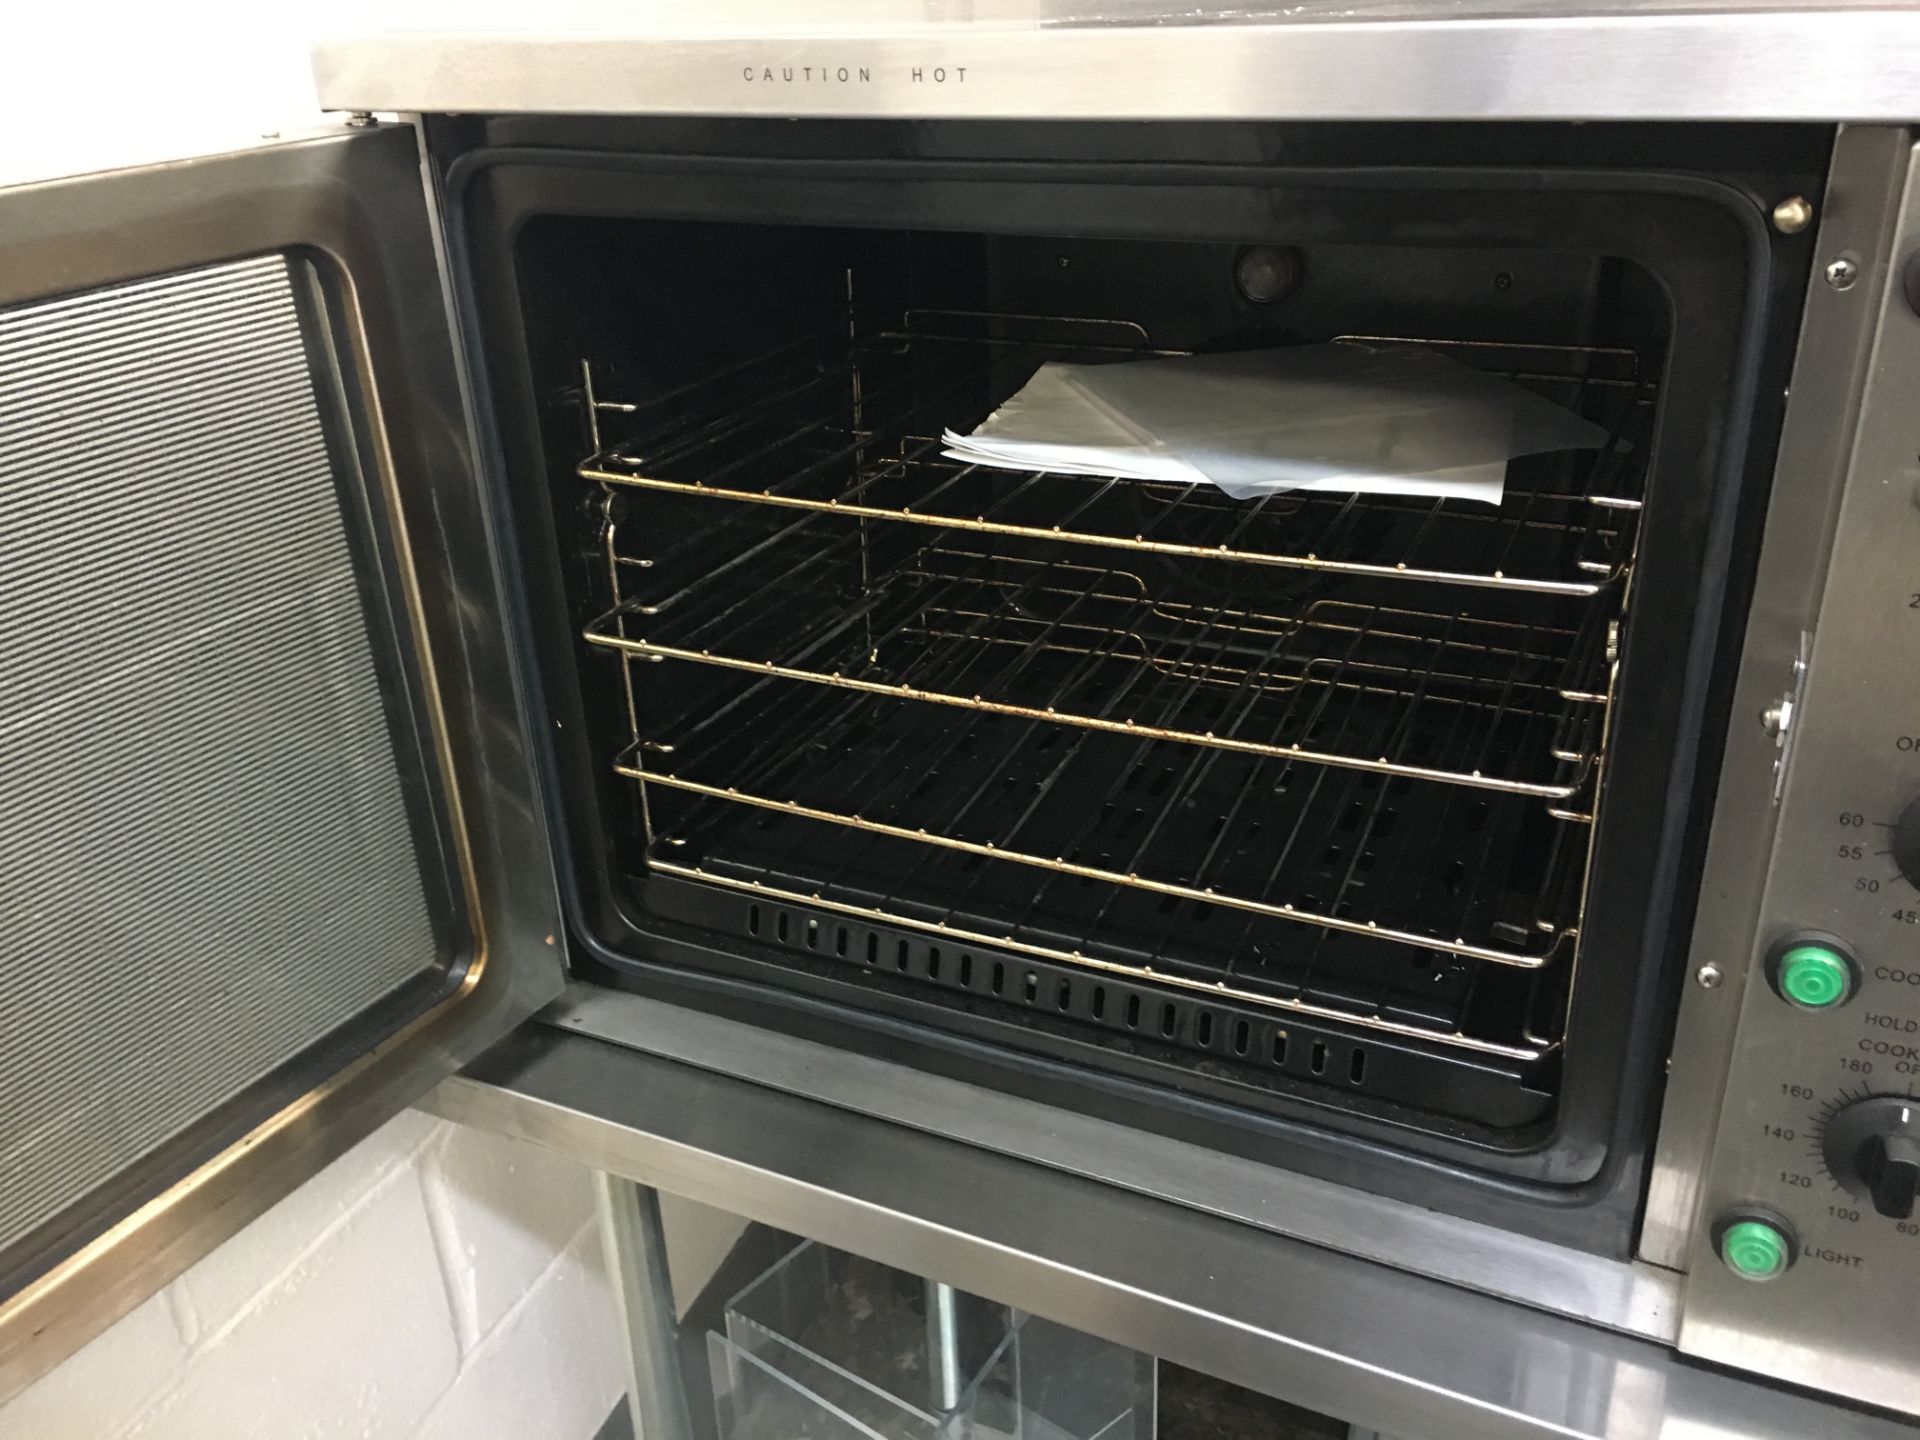 Stainless Steel Commercial Oven/Grill with Three Shelves and Manual Dimensions Approx 60 x 80 x - Bild 2 aus 2